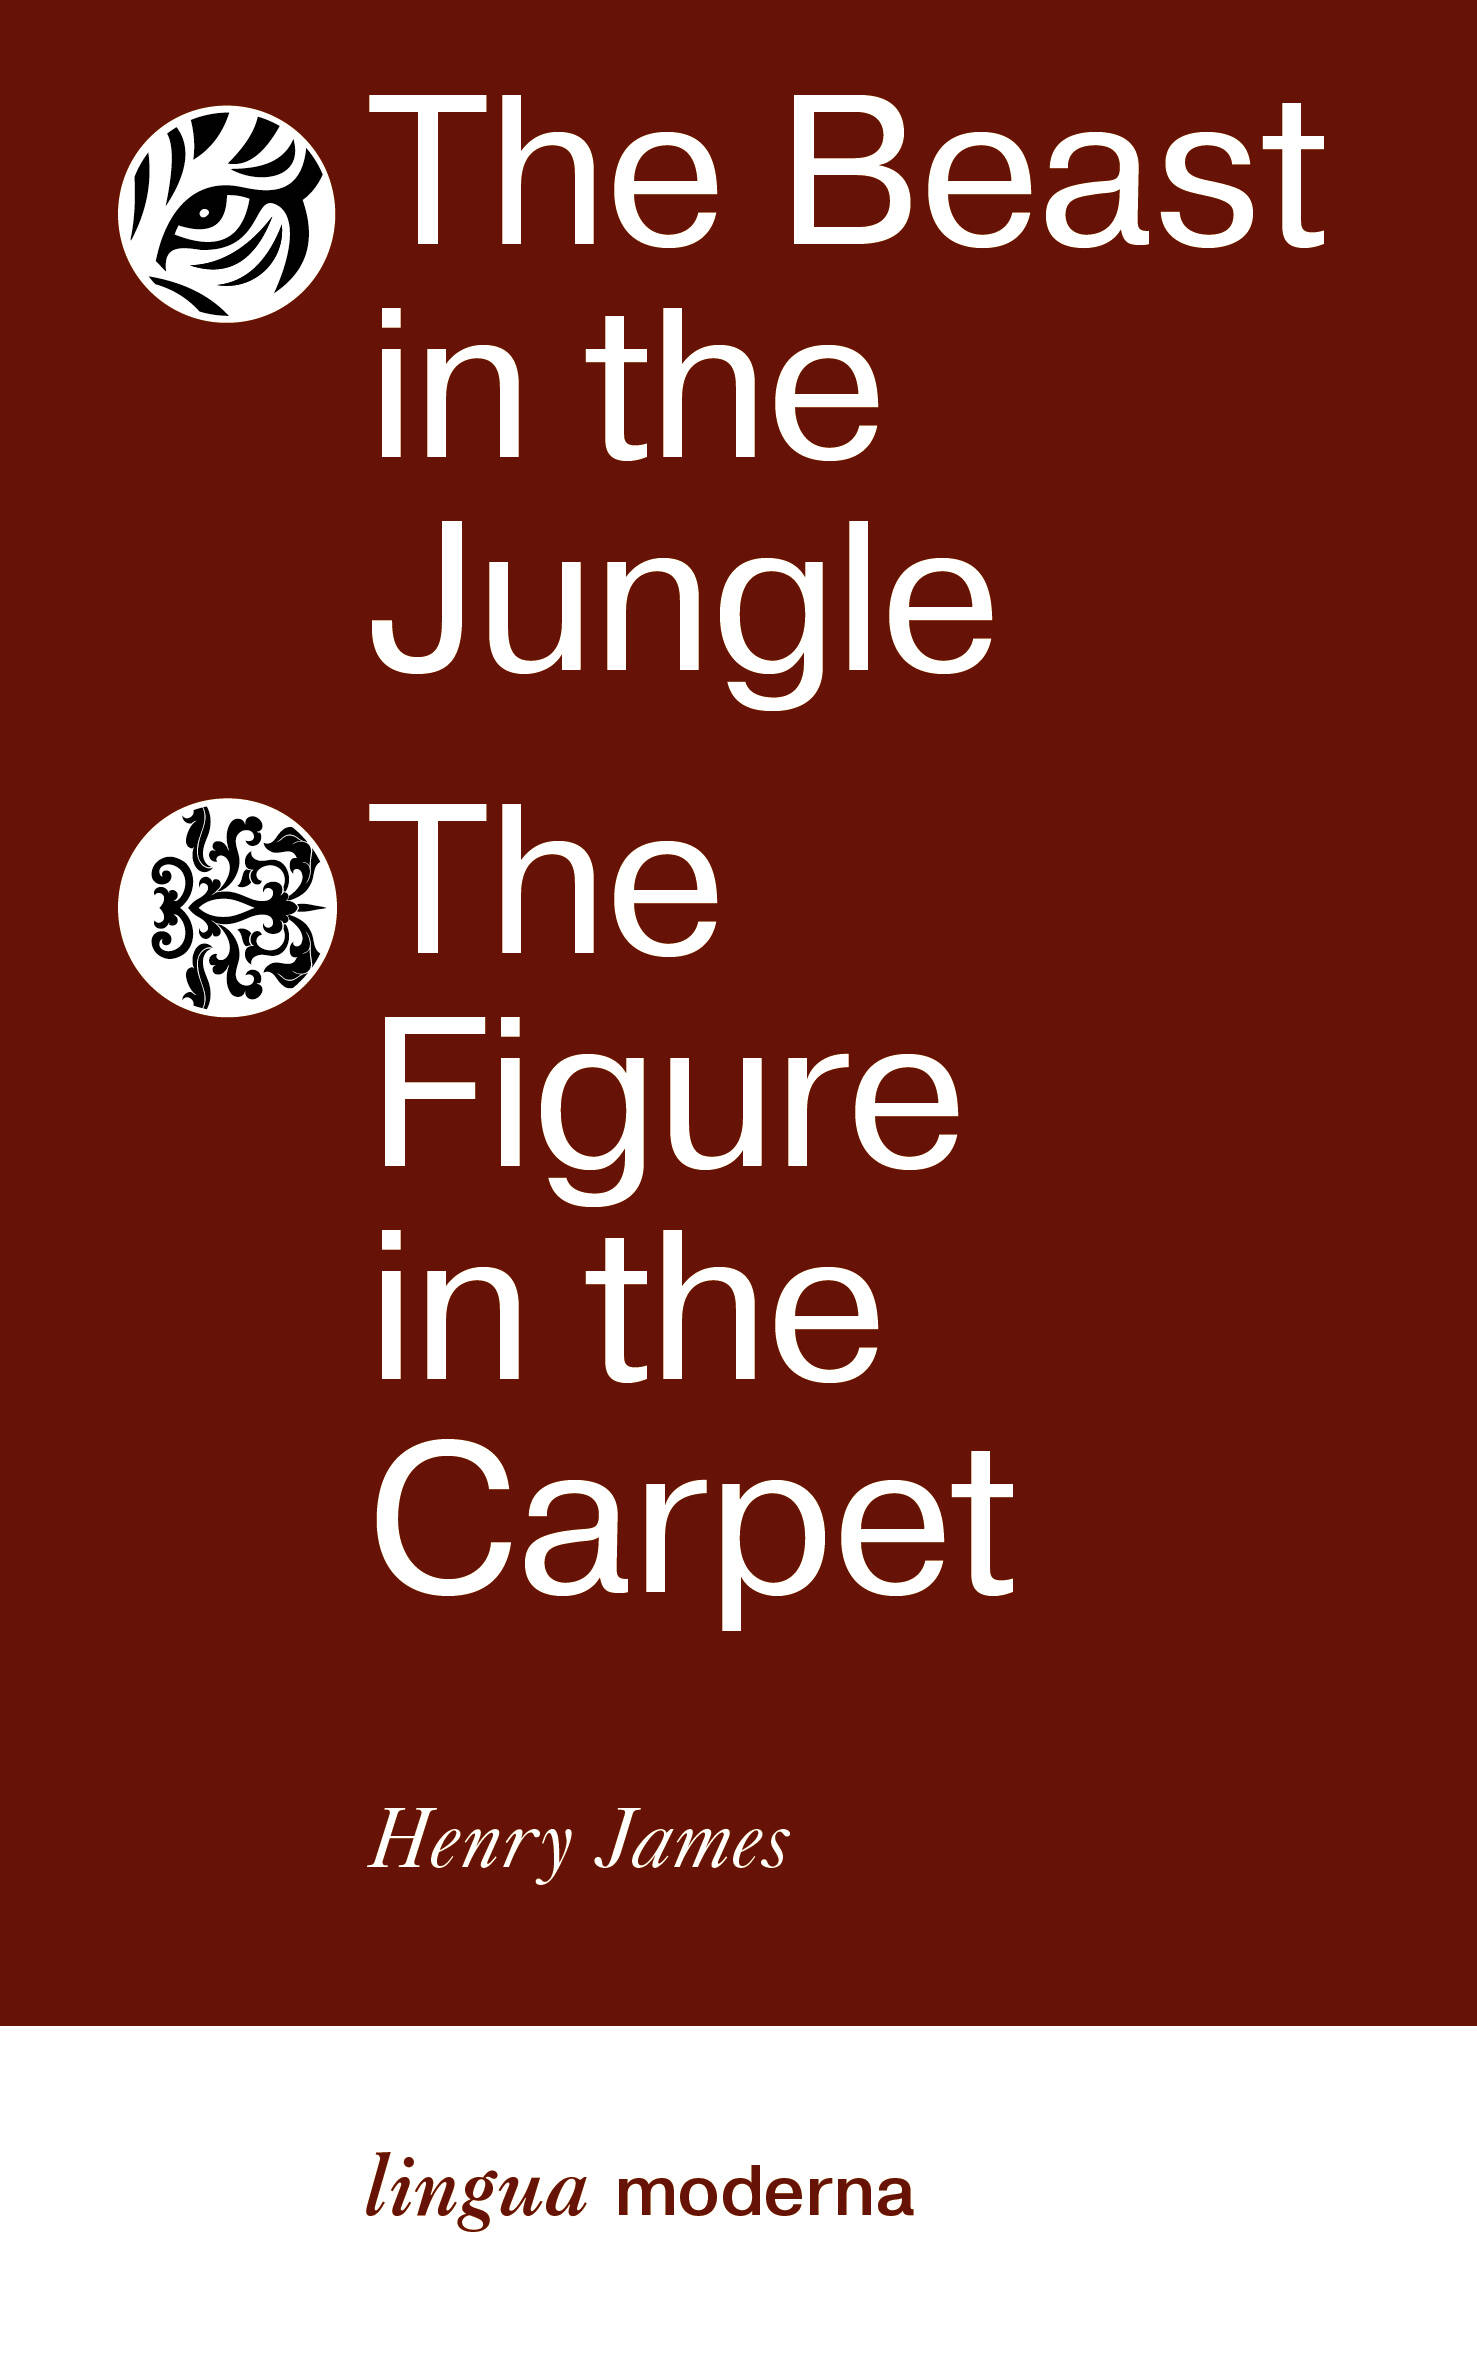 The Beast in the Jungle. The Figure in the Carpet джеймс генри неад чт тв the рortrait of